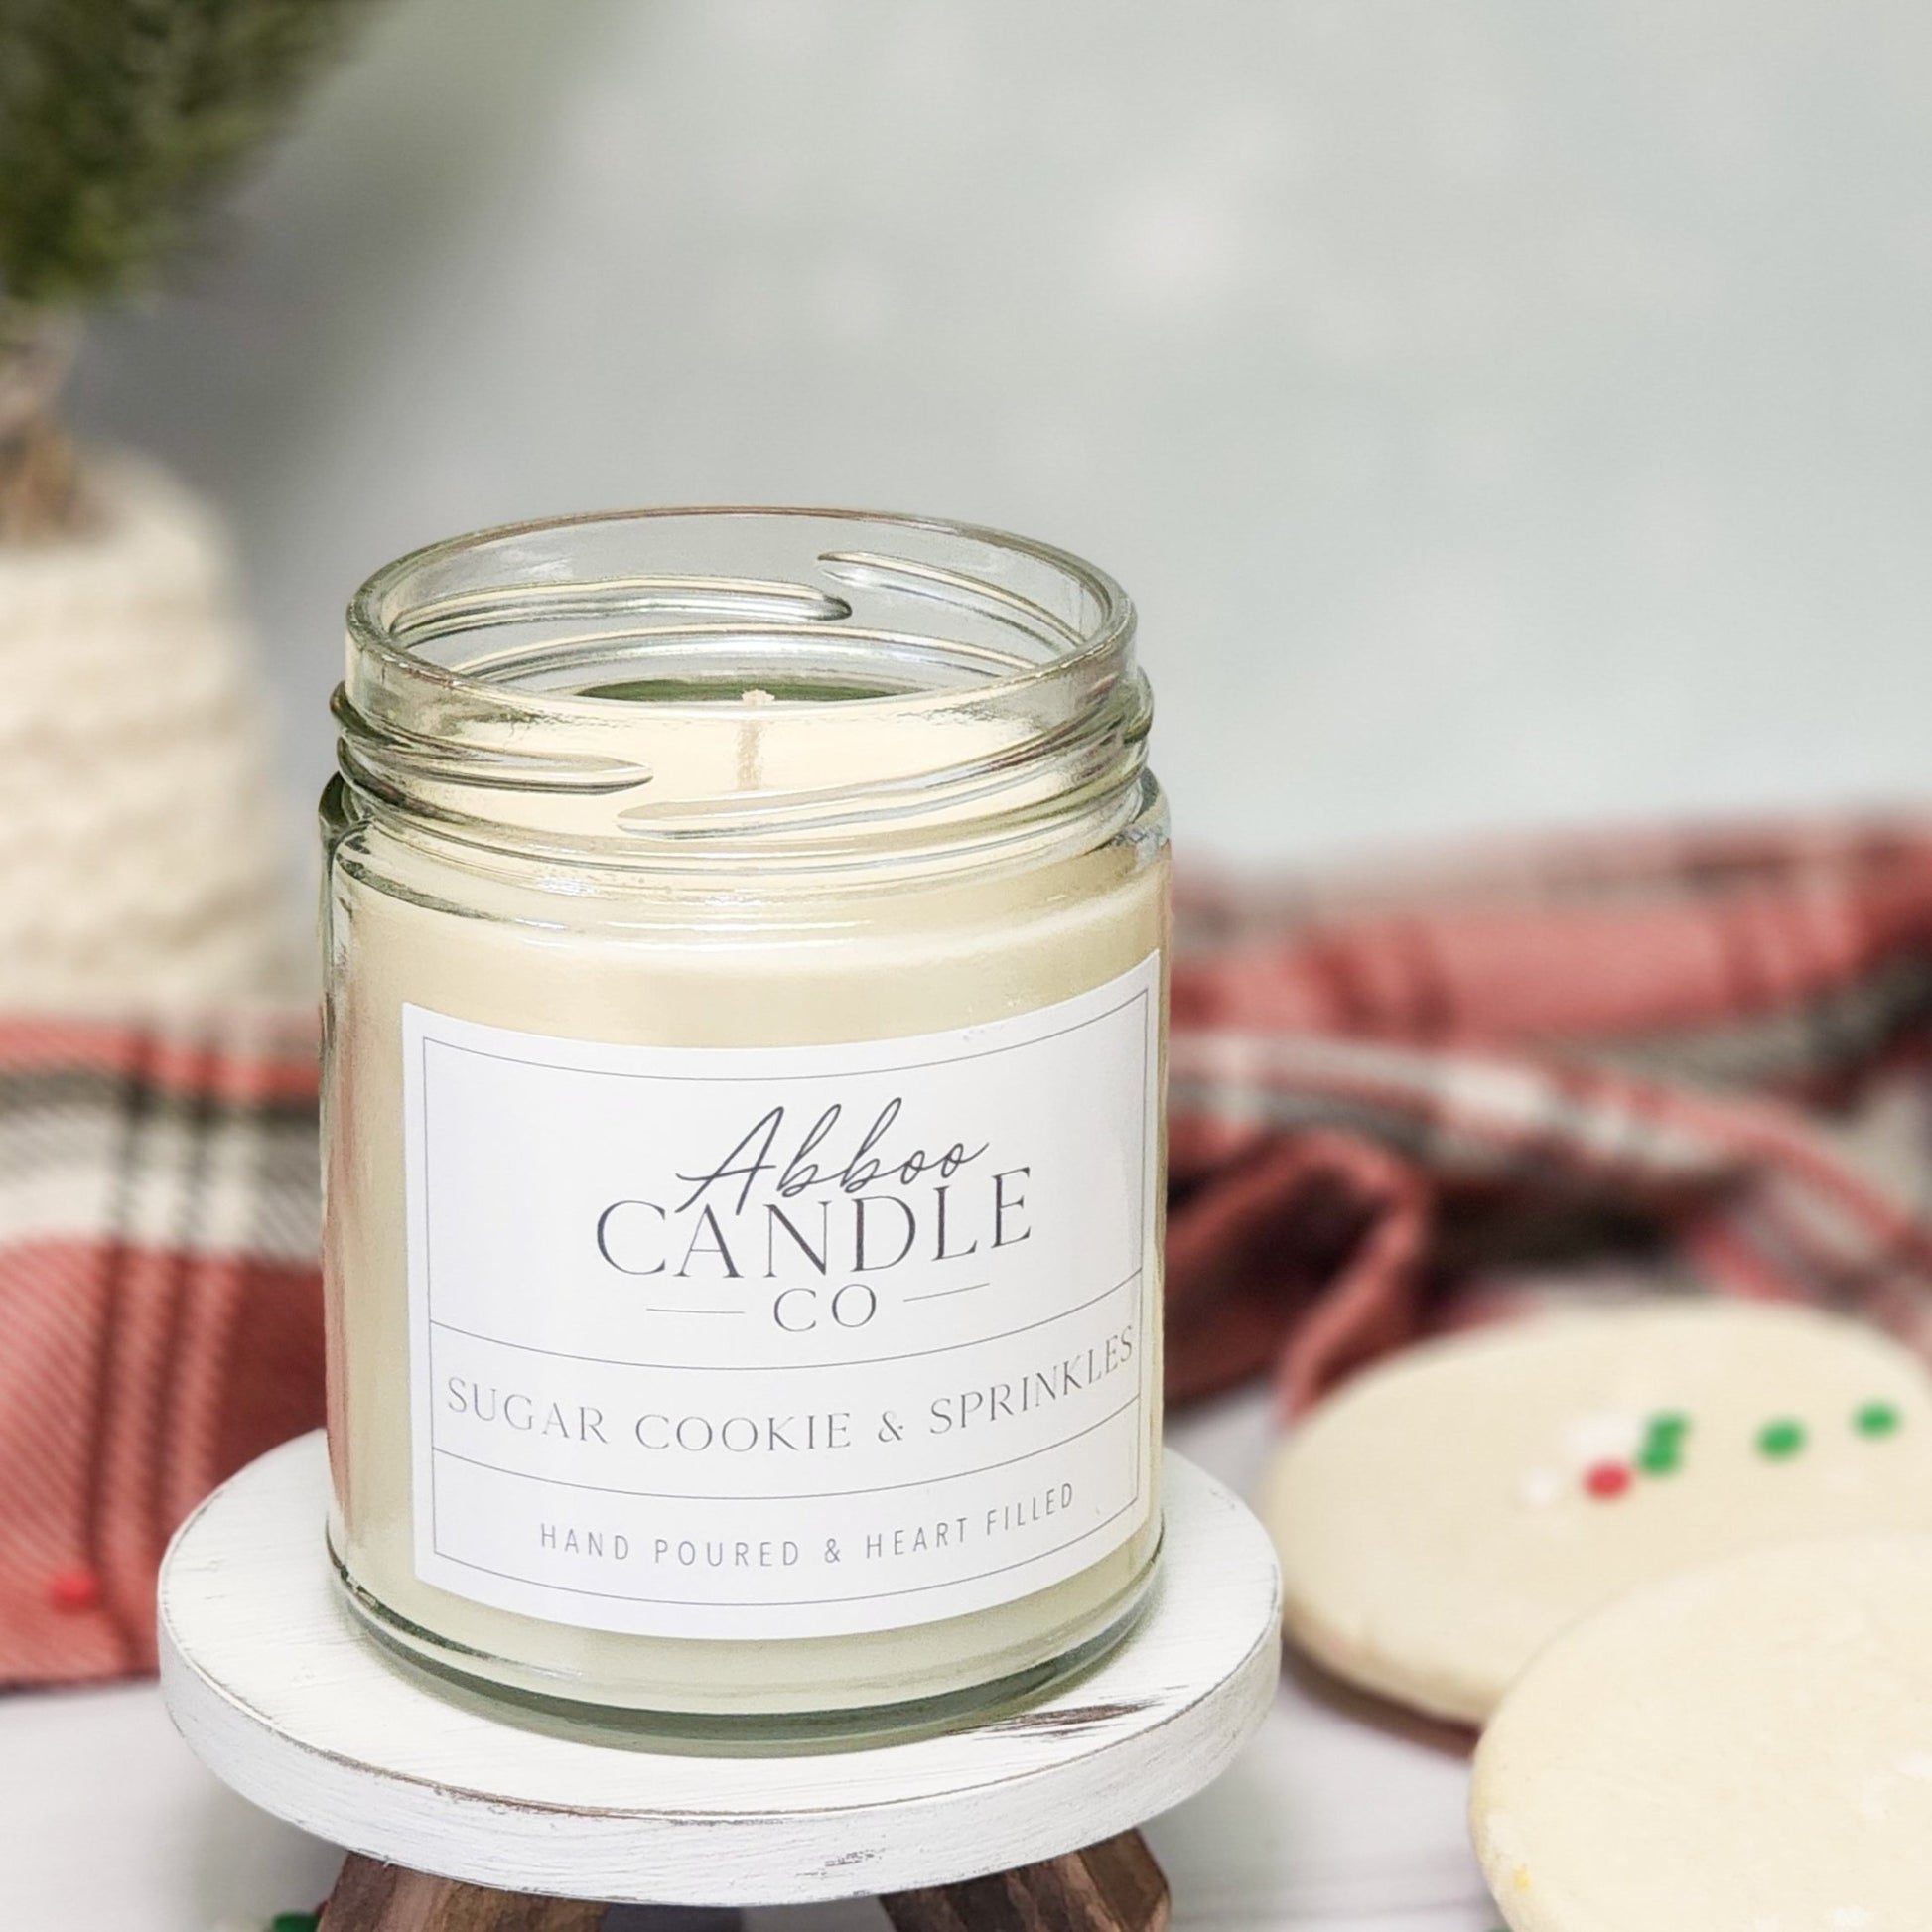 Sugar Cookie and Sprinkles Soy Candle - Abboo Candle Co